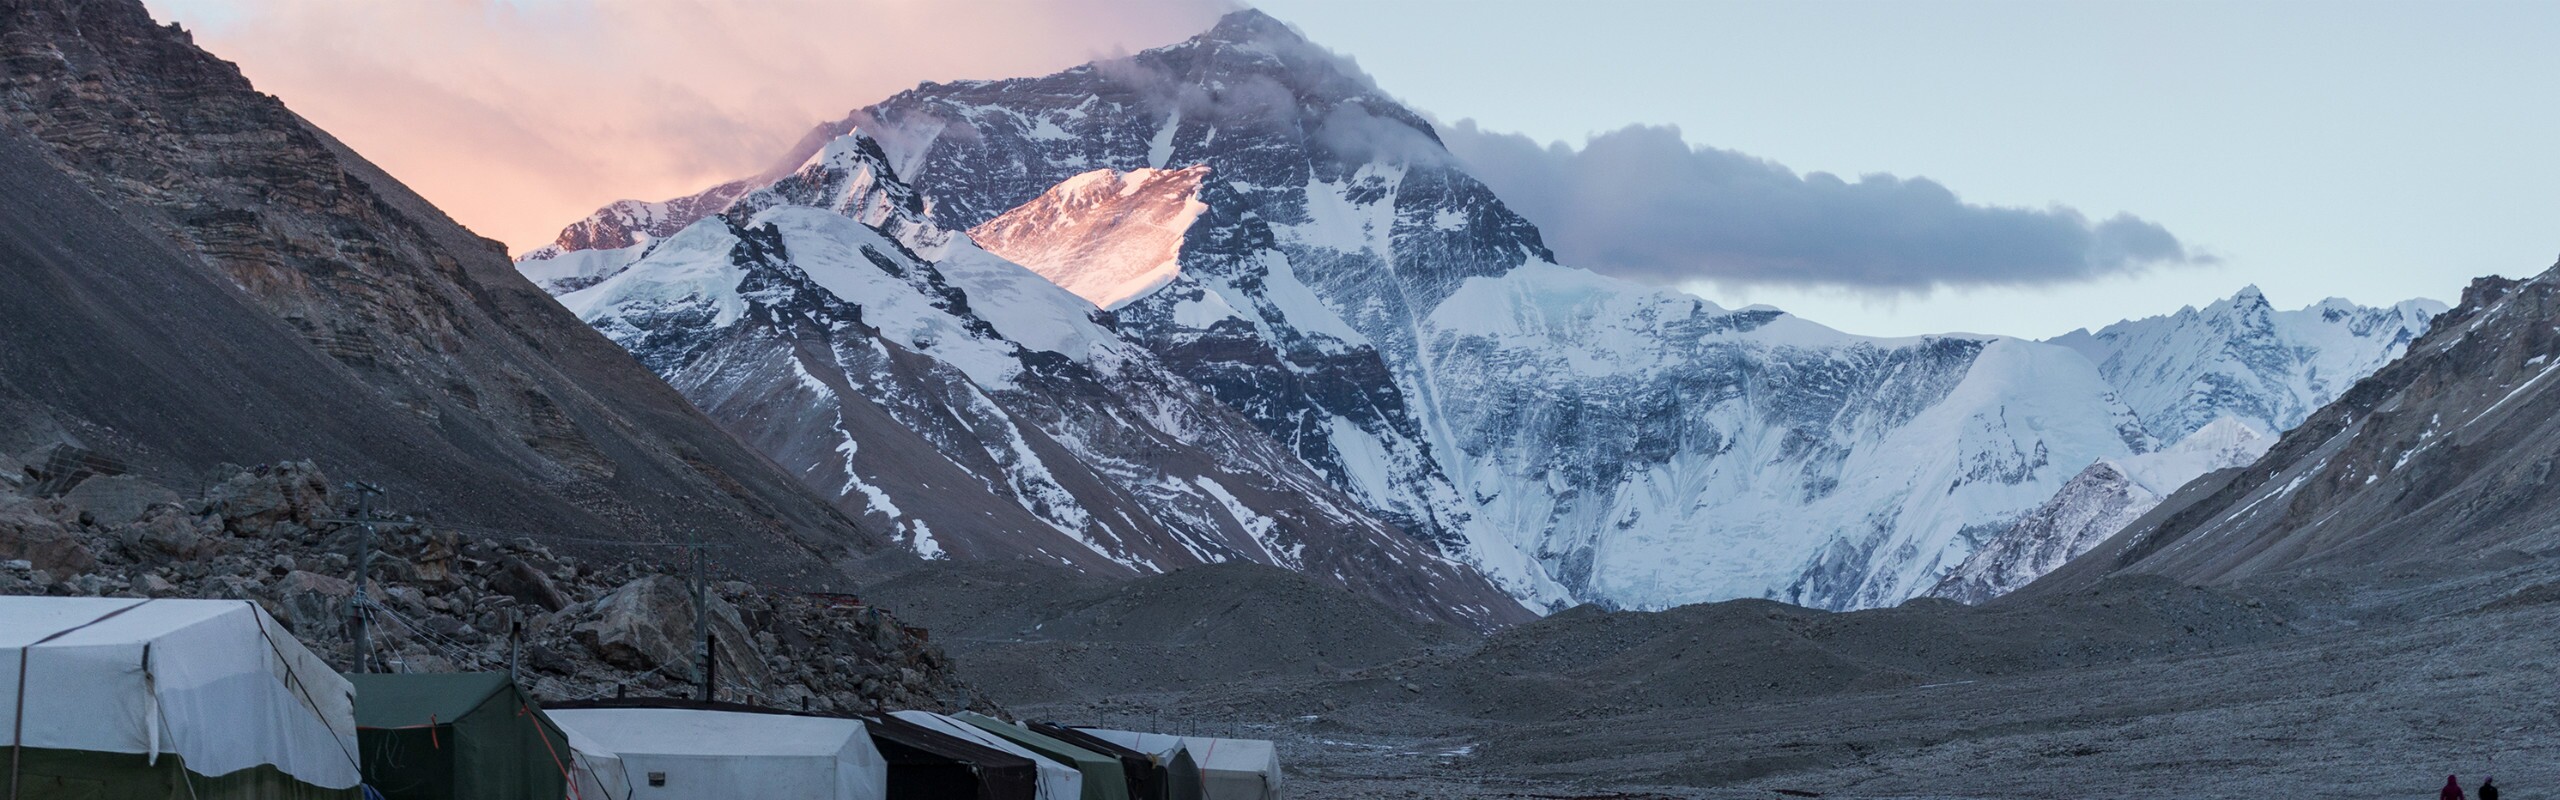 8-Day Lhasa to Everest Base Camp Tour